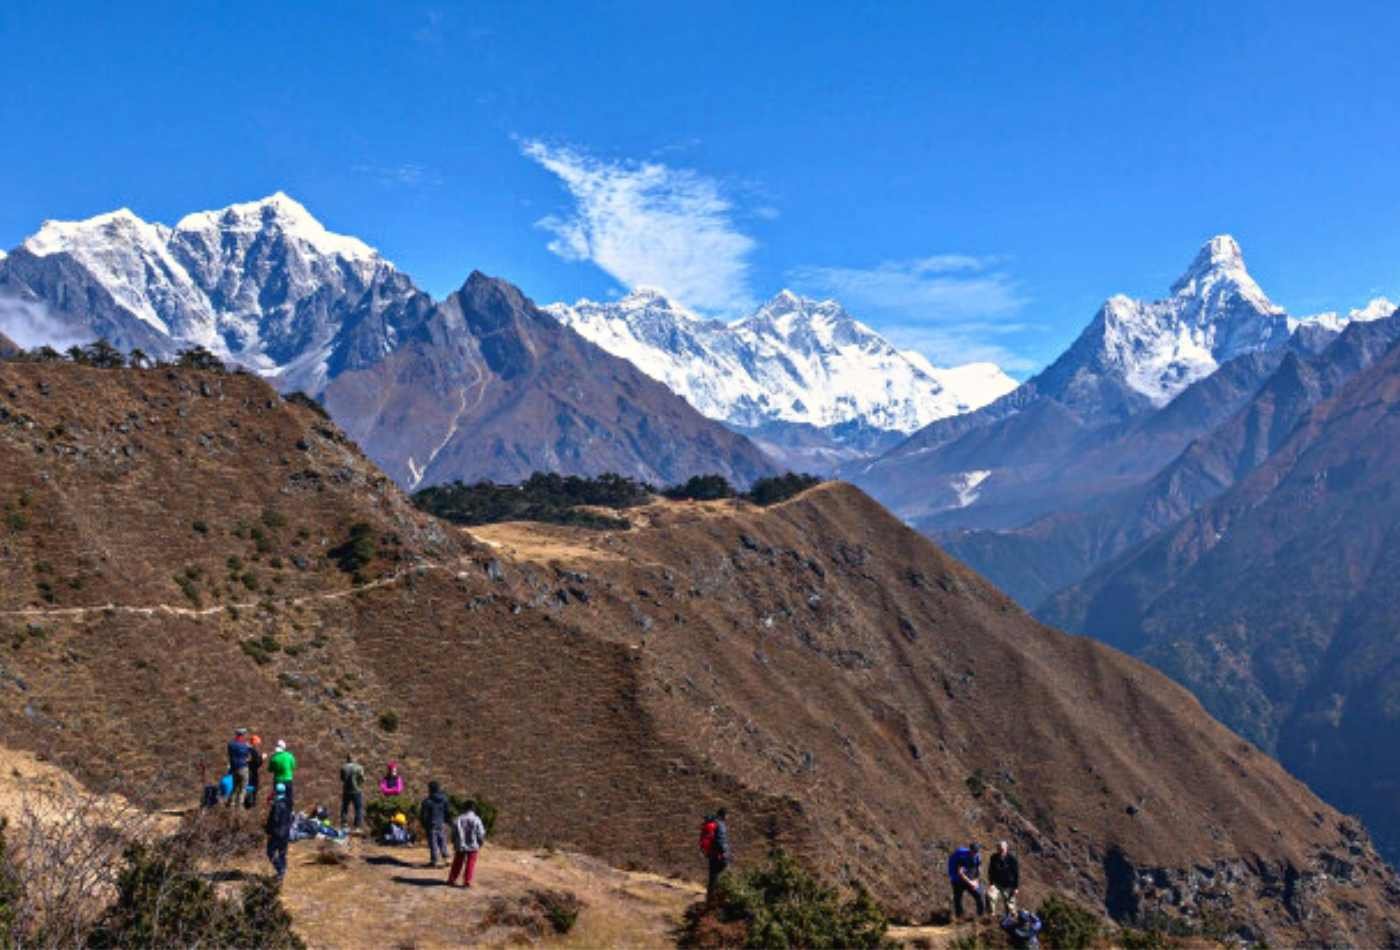  A stunning view from Namche of the world's highest mountain, Mt. Everest, along with its neighboring peaks Nuptse, Lhotse, and Ama Dablam. 